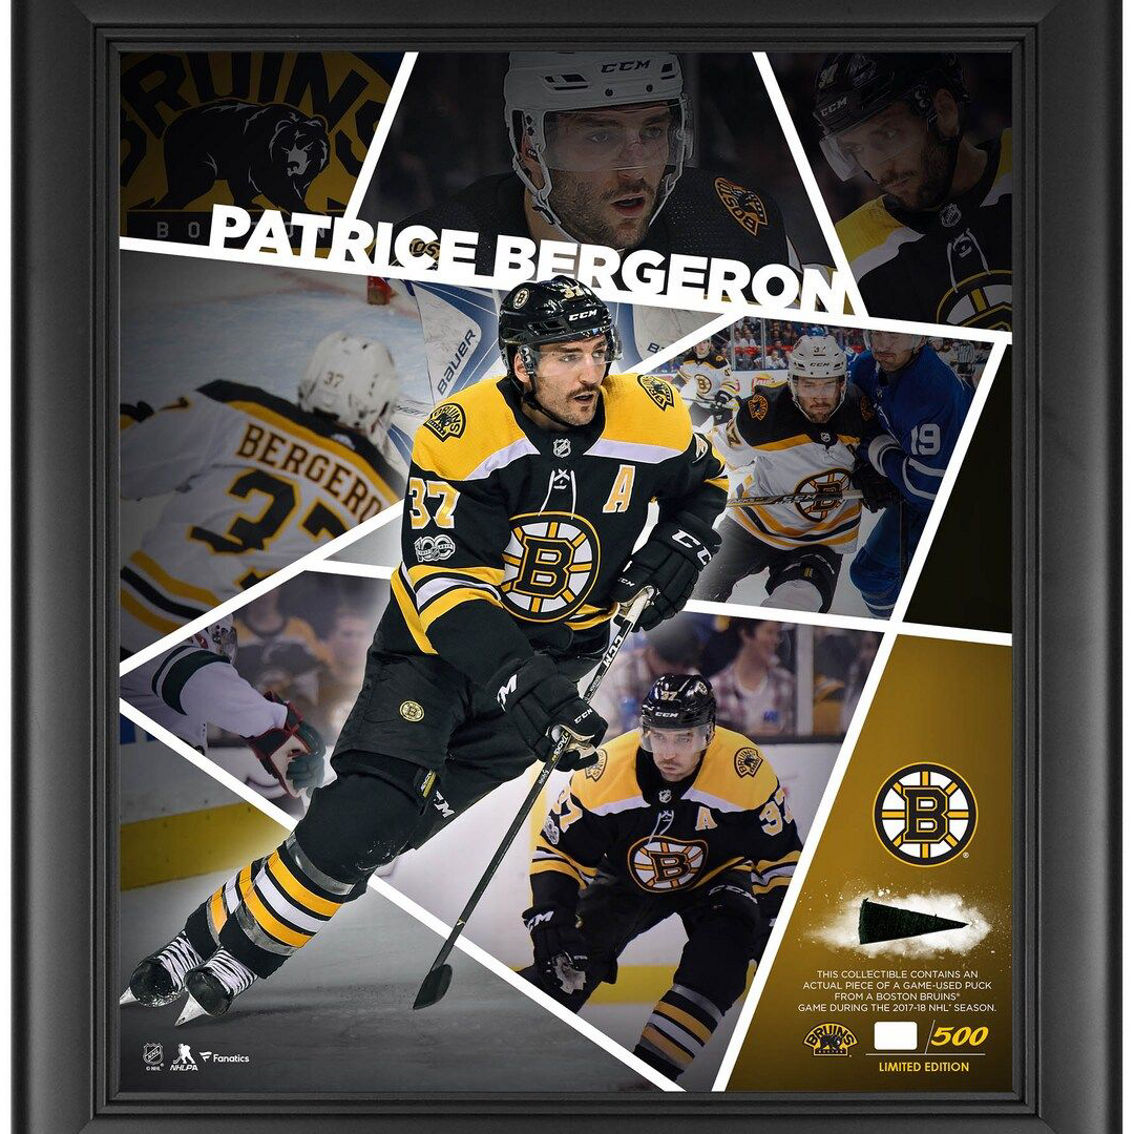 Fanatics Authentic Patrice Bergeron Boston Bruins Framed 15'' x 17'' Impact Player Collage with a Piece of Game-Used Puck - Limited Edition of 500 - Image 2 of 2